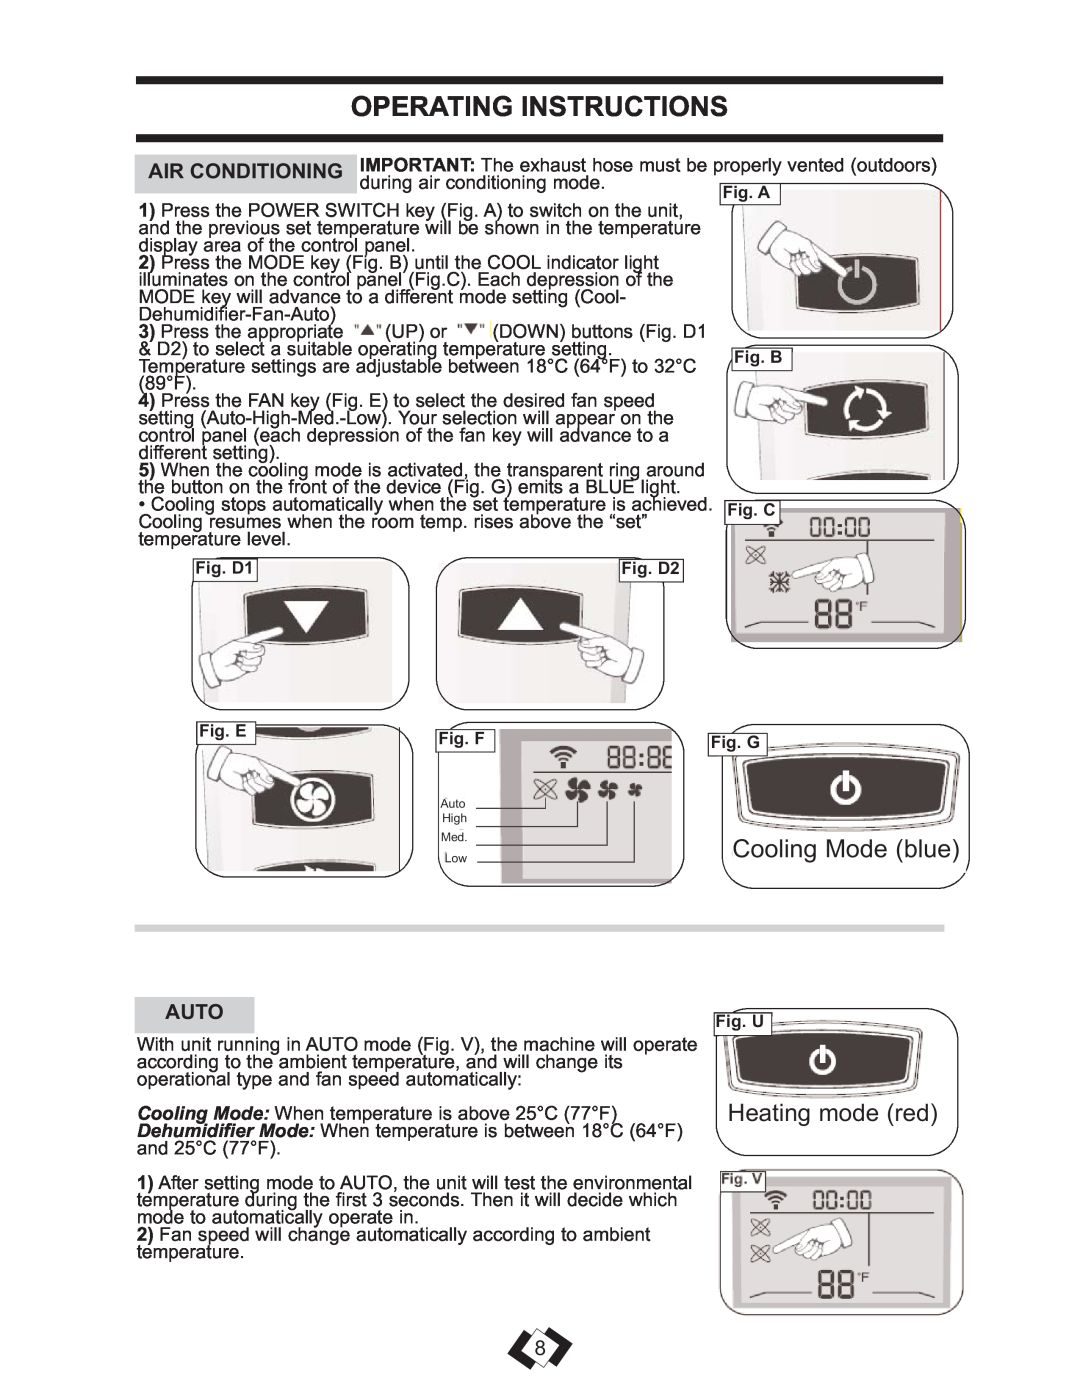 Danby DPAC 13009 operating instructions Heating mode red, Operating Instructions, Cooling Mode blue 